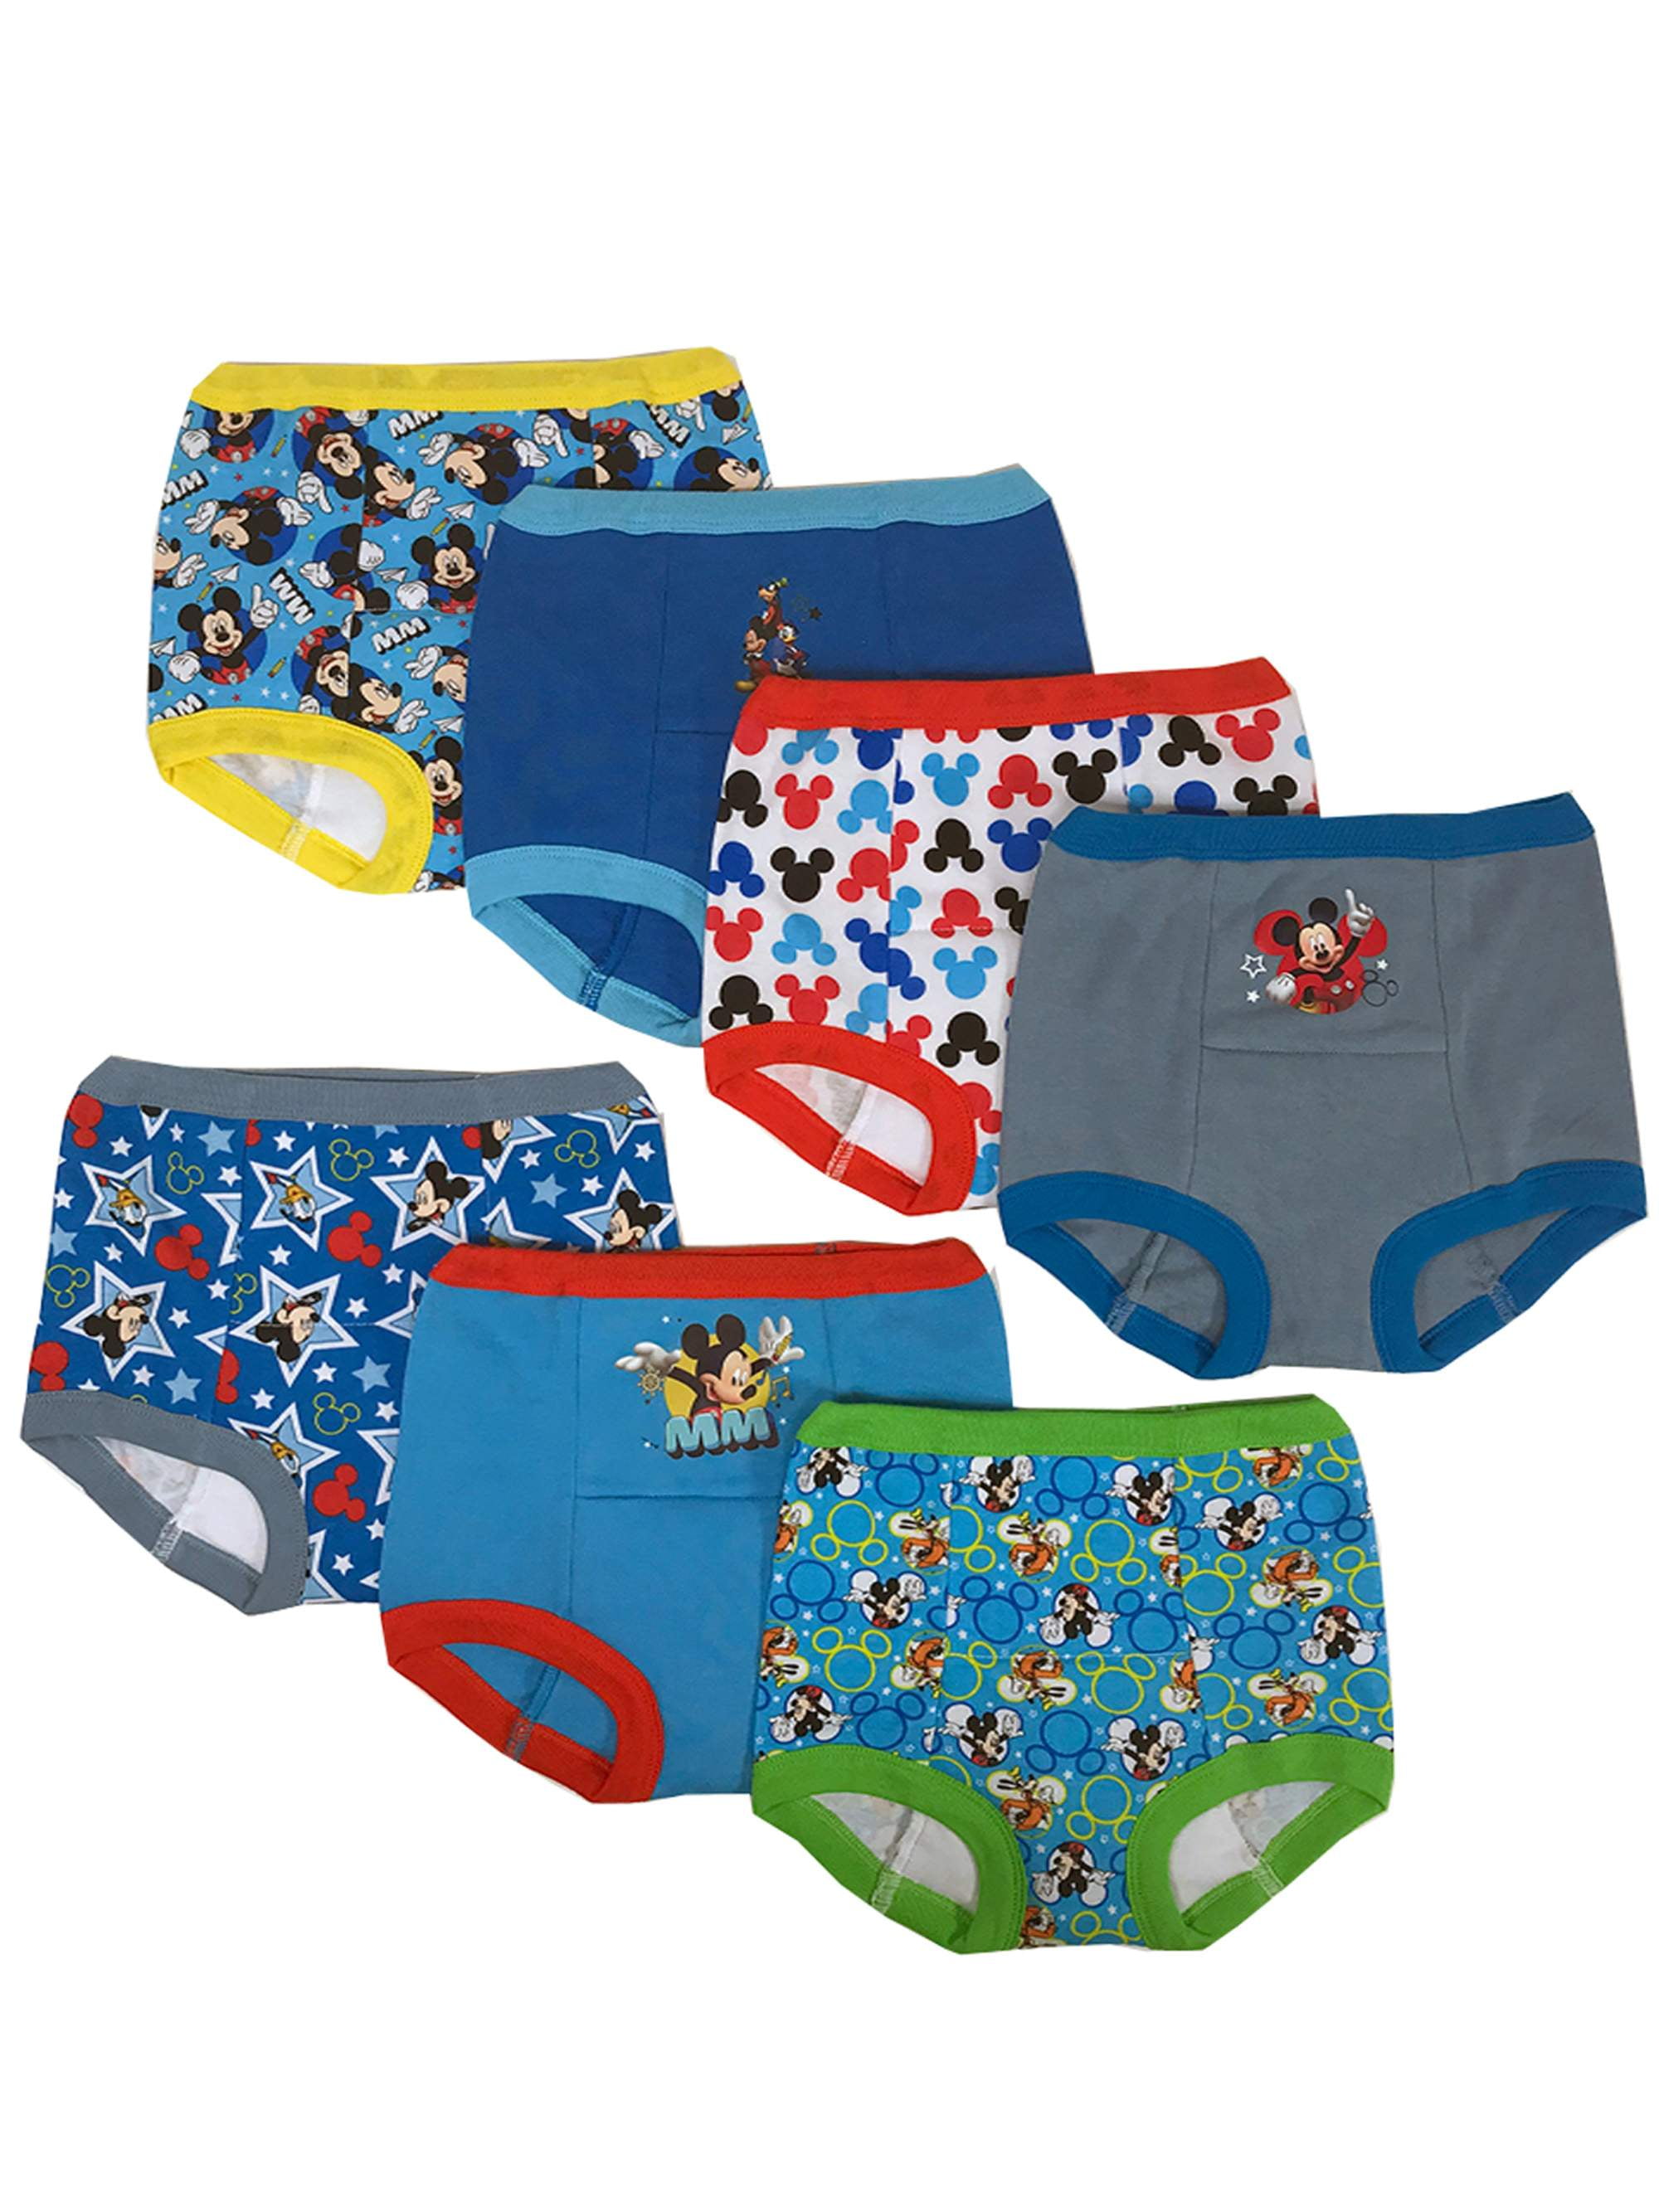 Mickey Mouse Toddler Boy Training Underwear, 7-Pack, Sizes 18M